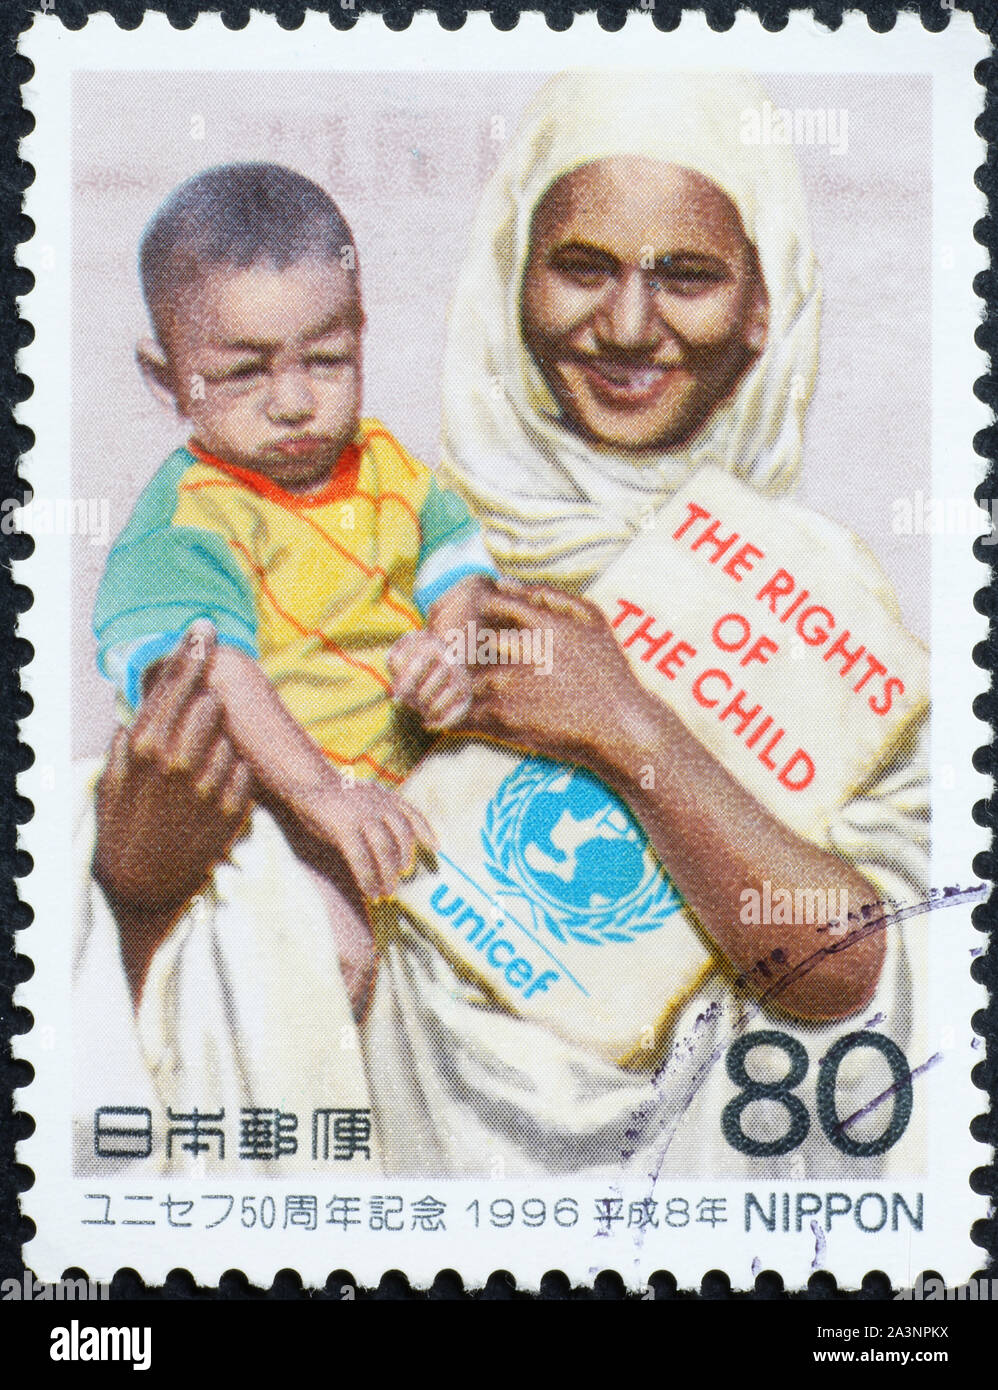 The rights of child on japanese postage stamp Stock Photo